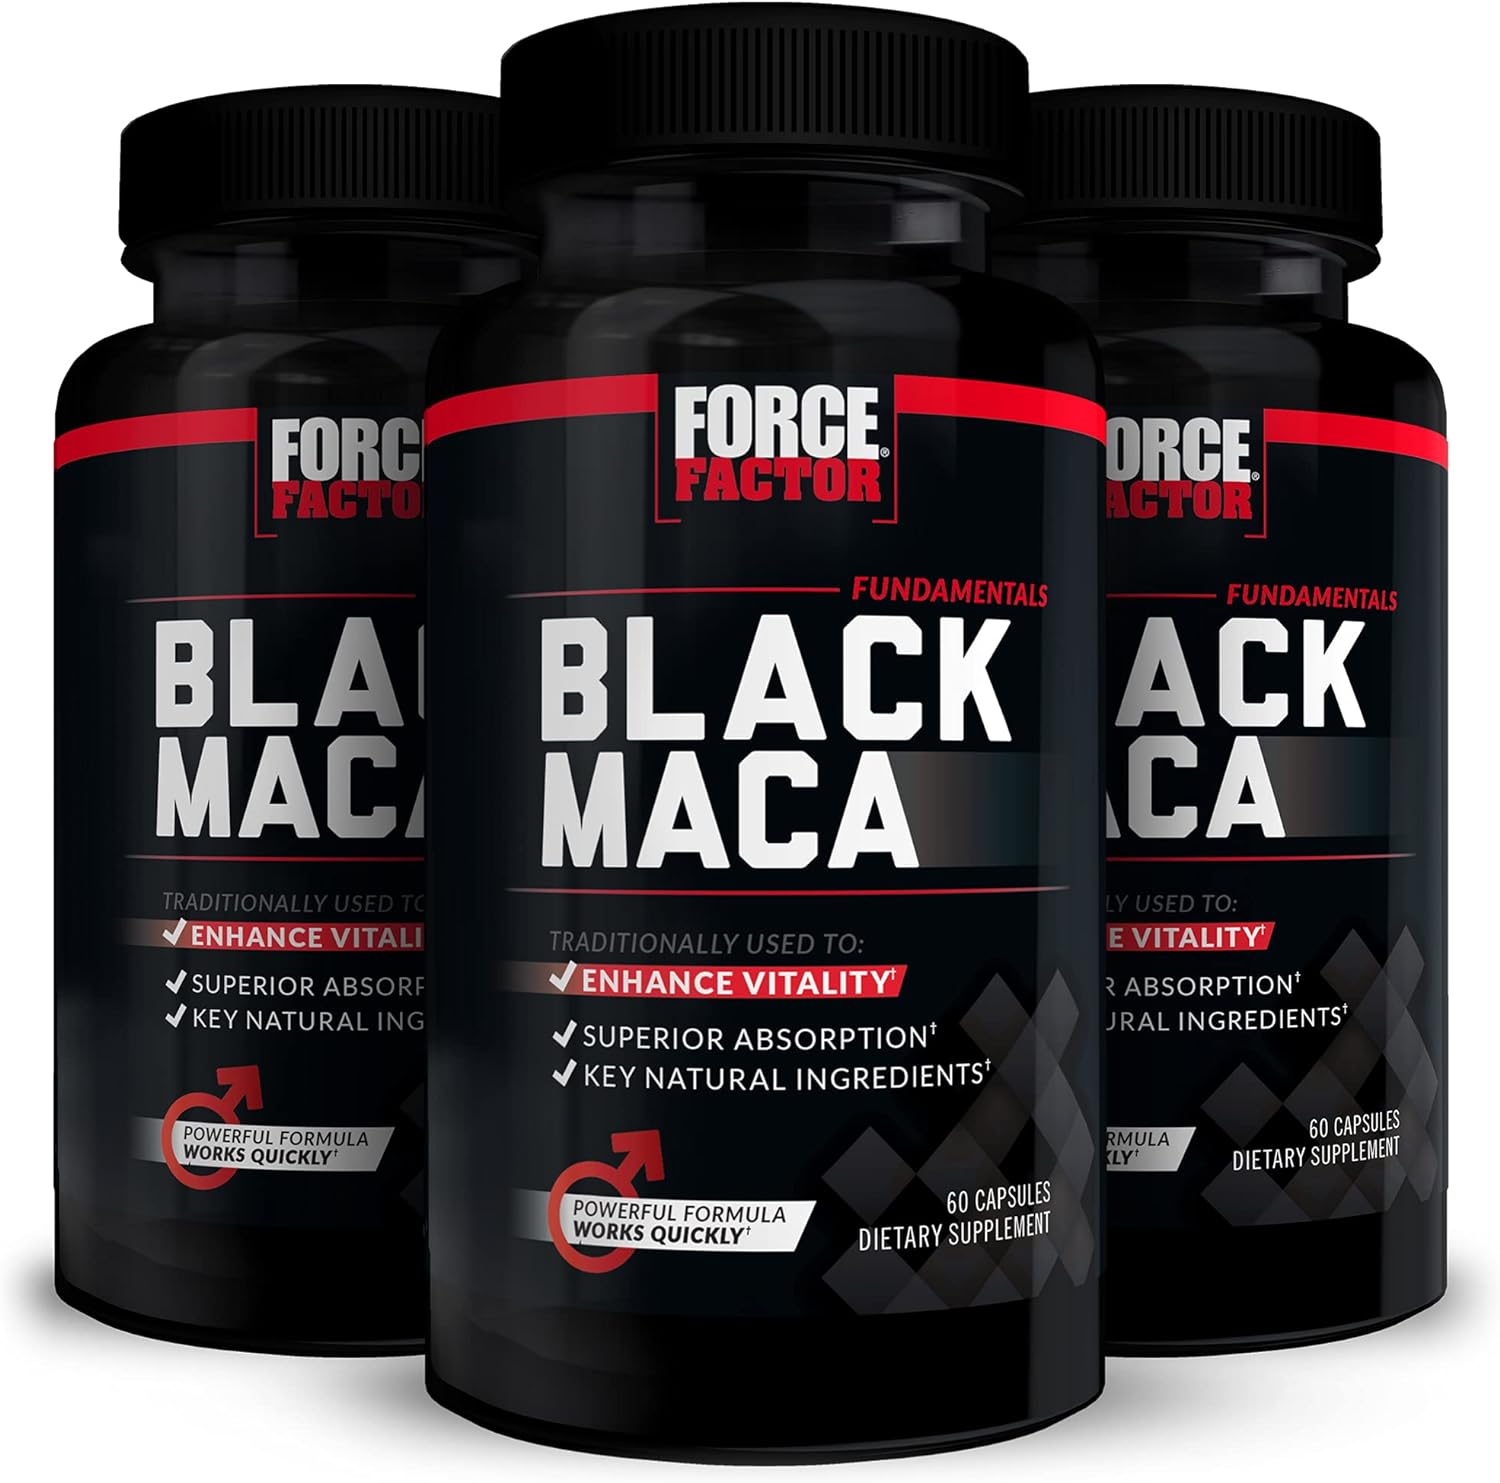 FORCE FACTOR Black Maca Root, 3-Pack, Vitality Supplement for Men with Superior Absorption and Power, Natural Maca Negra Extract, Fundamentals Series, 1000mg, 180 Capsules